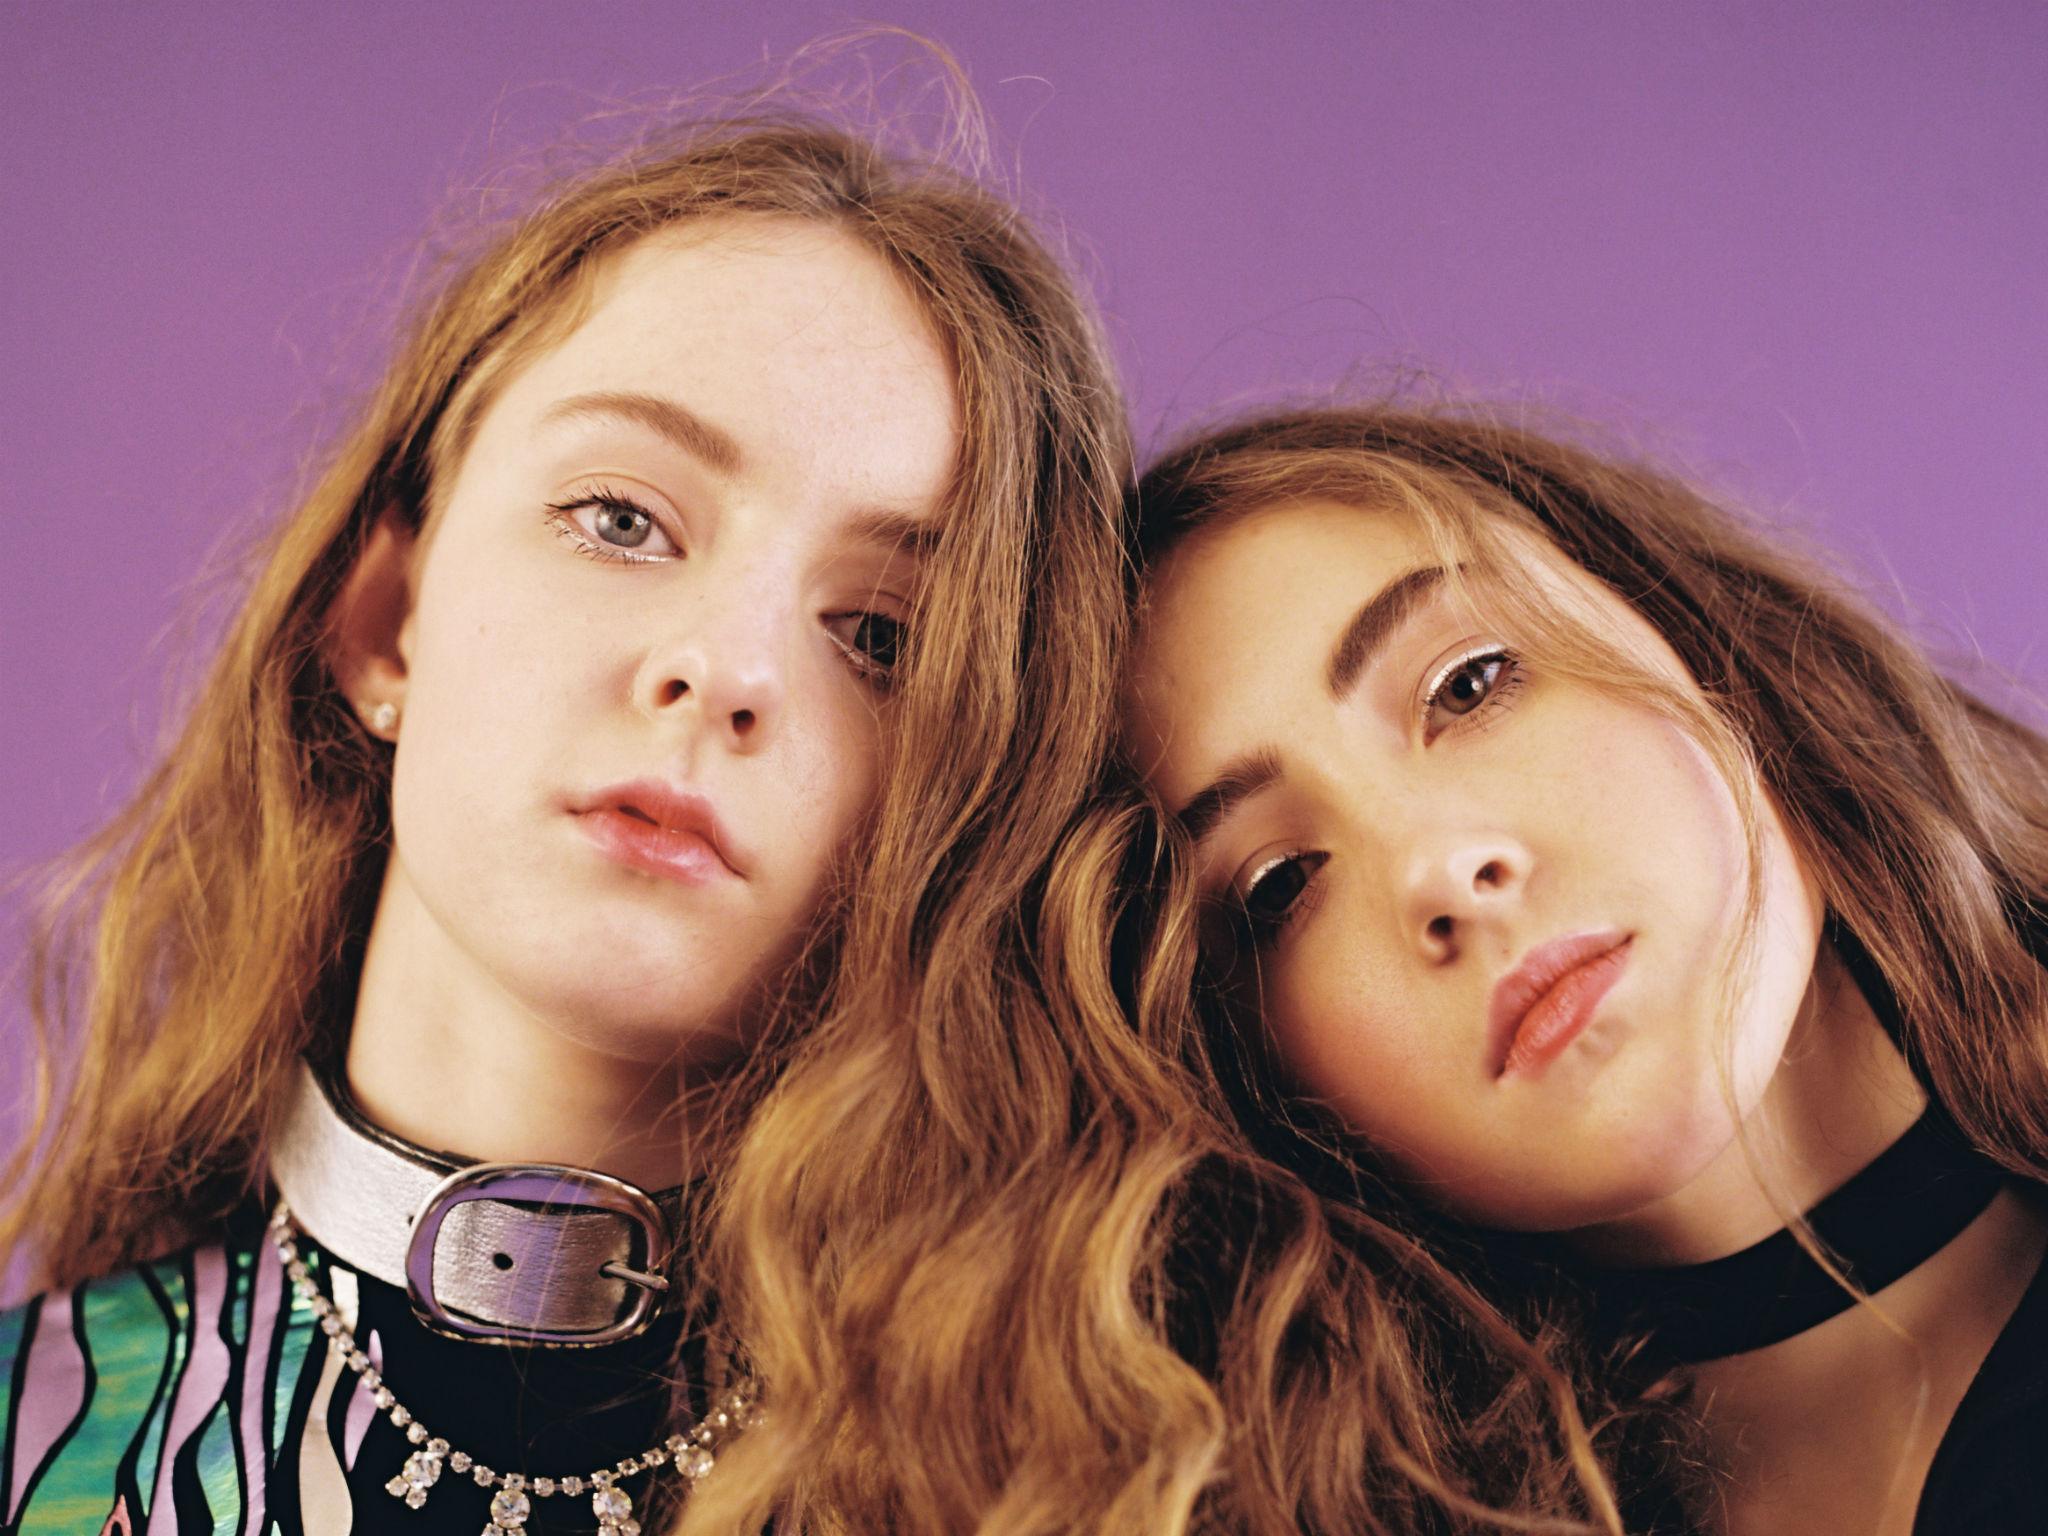 Let's Eat Grandma, whose album I, Gemini, Andy Gill thinks should be nominated for the Mercury Prize